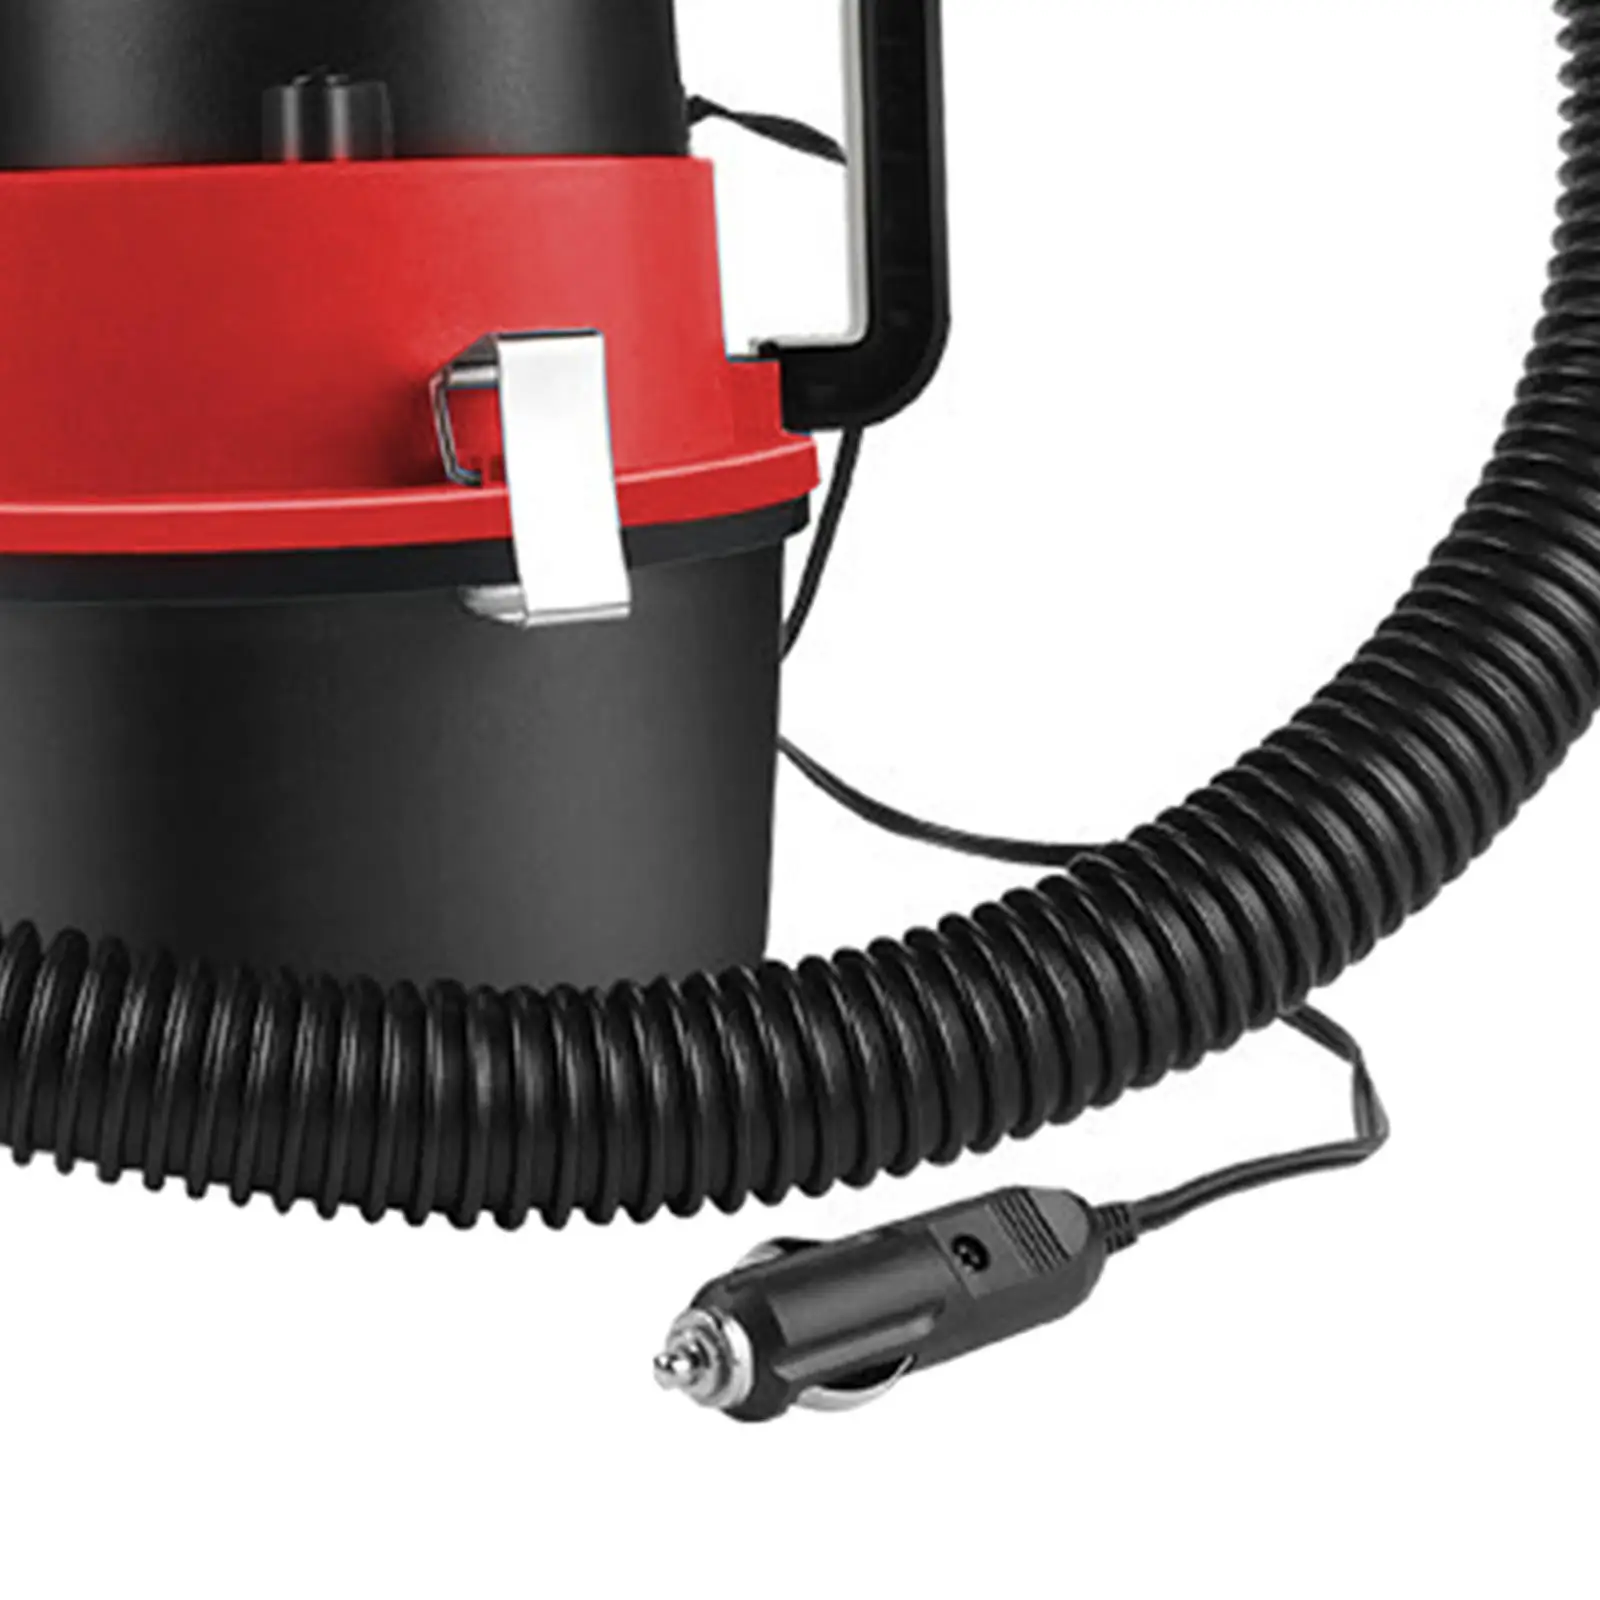 12V Wet/Dry Car Canister Vacuum Flexible 3 Foot Hose for Greater Reach Wet or Dry Pickup 4L Capacity Durable Light Duty Compact